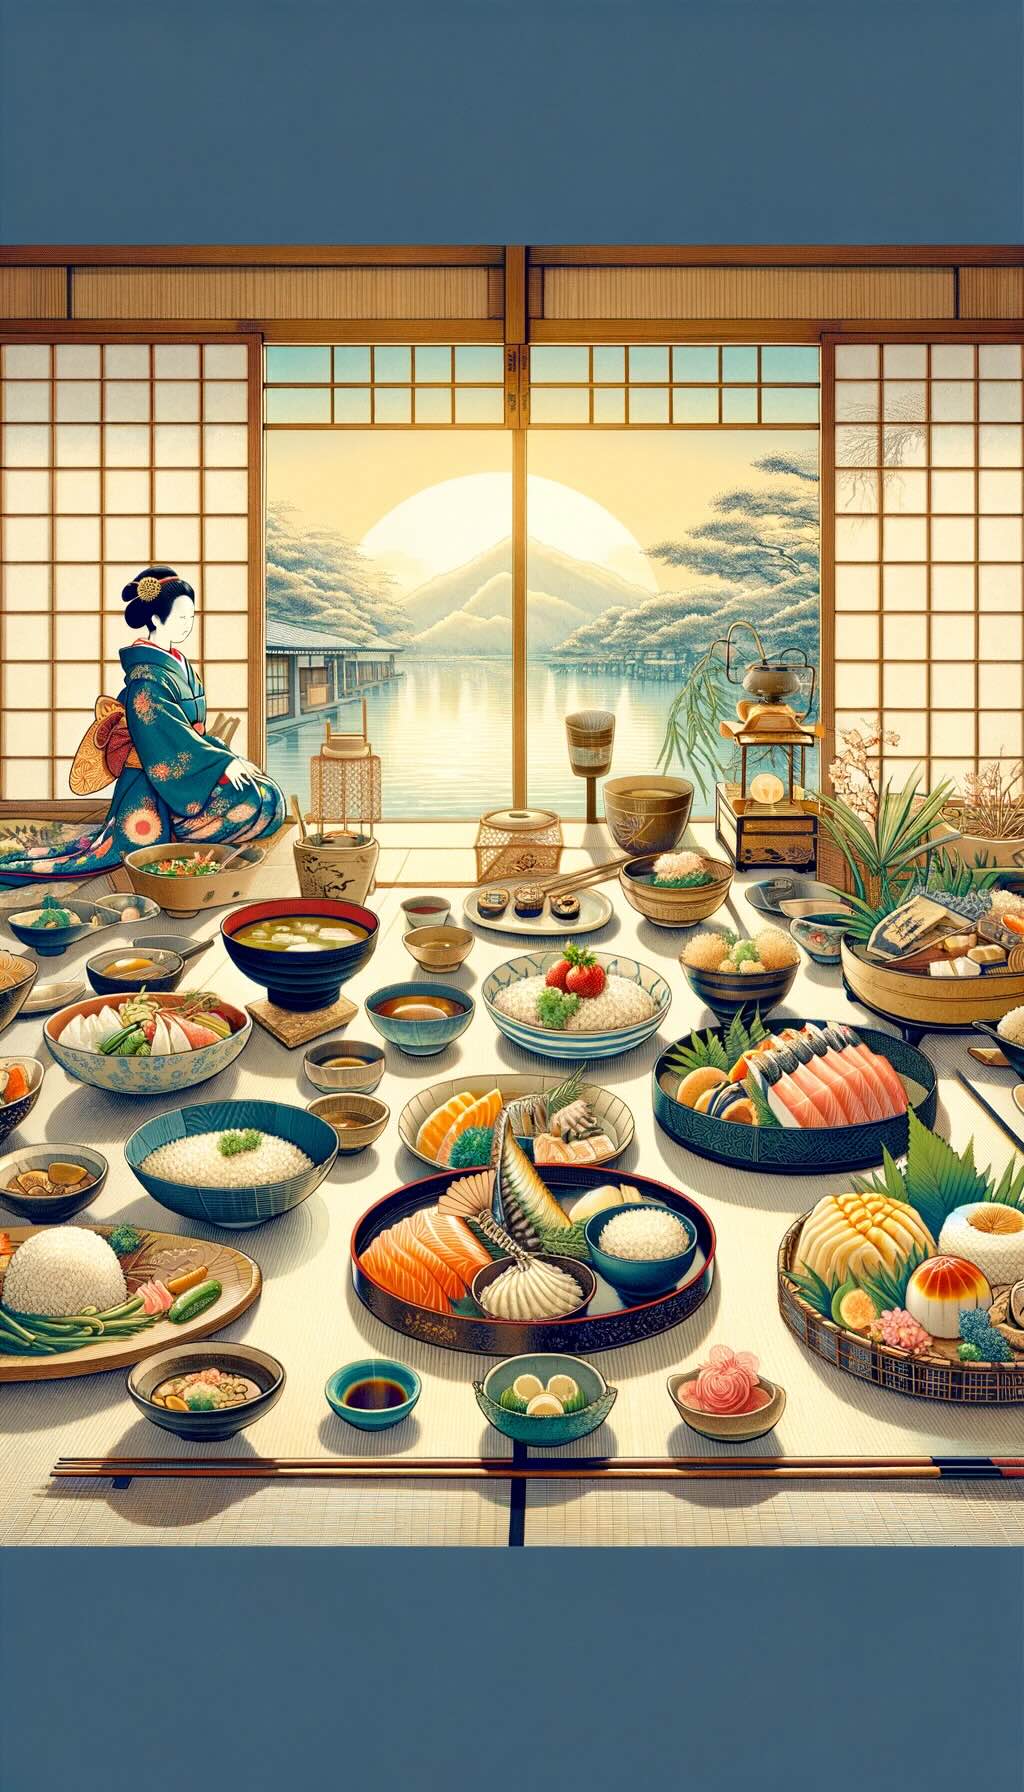 Rich culinary heritage of a traditional Japanese ryokan, highlighting both the elaborate kaiseki dinners and the hearty breakfasts. The image embodies the elegance and artistry of Japanese gastronomy, set in the serene ambiance of a ryokan